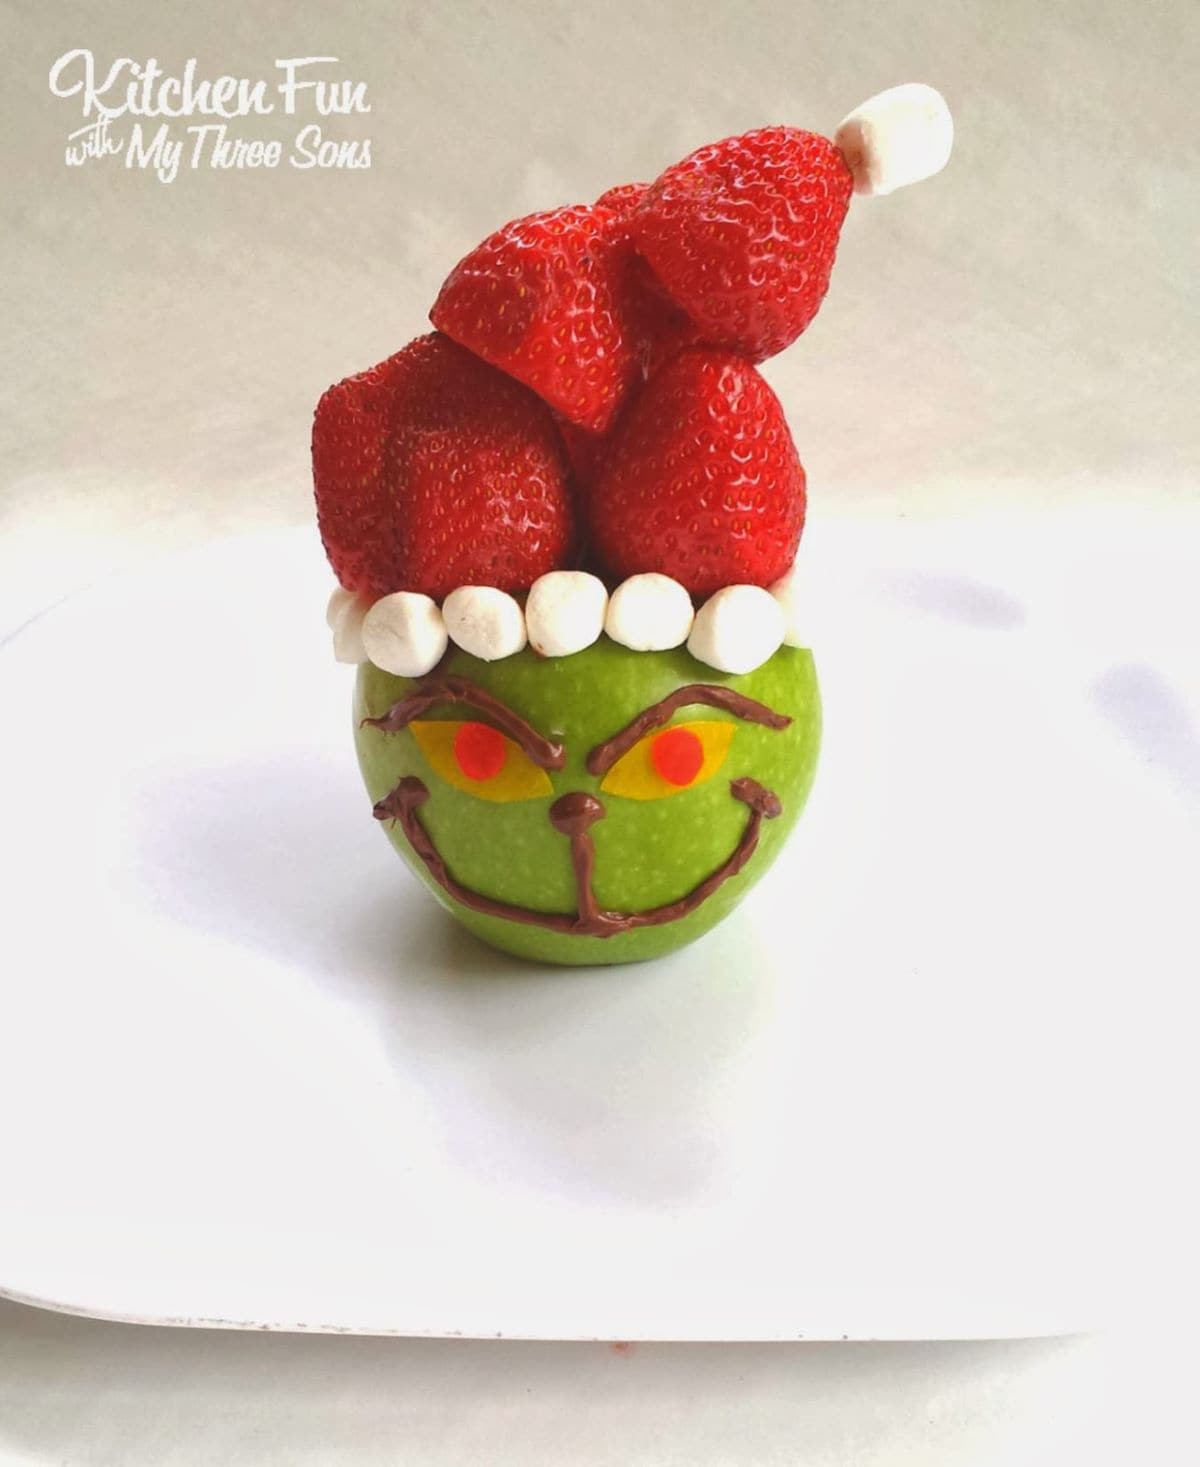 The Grinch Fruit Snack